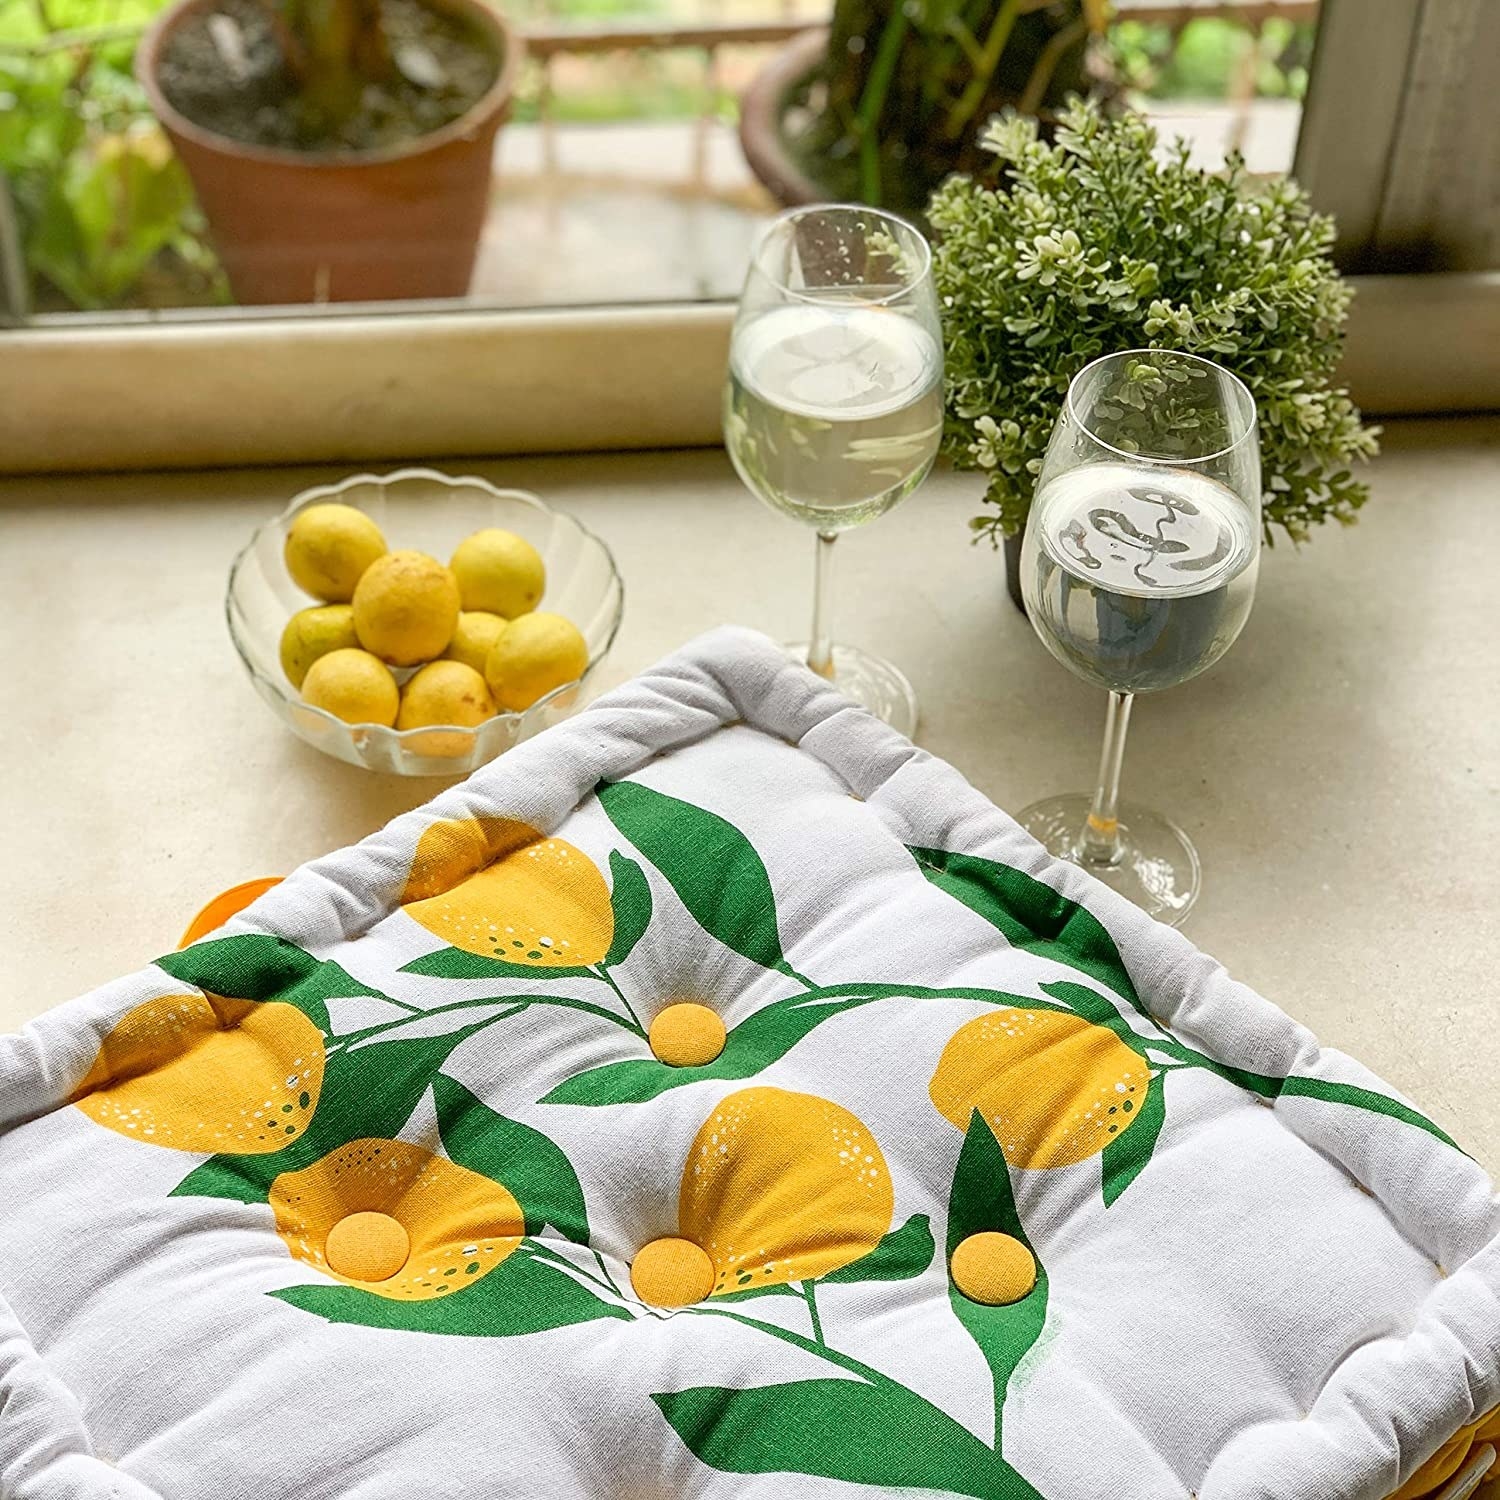 A white and yellow floor cushion with lemons and a glass of wine beside it